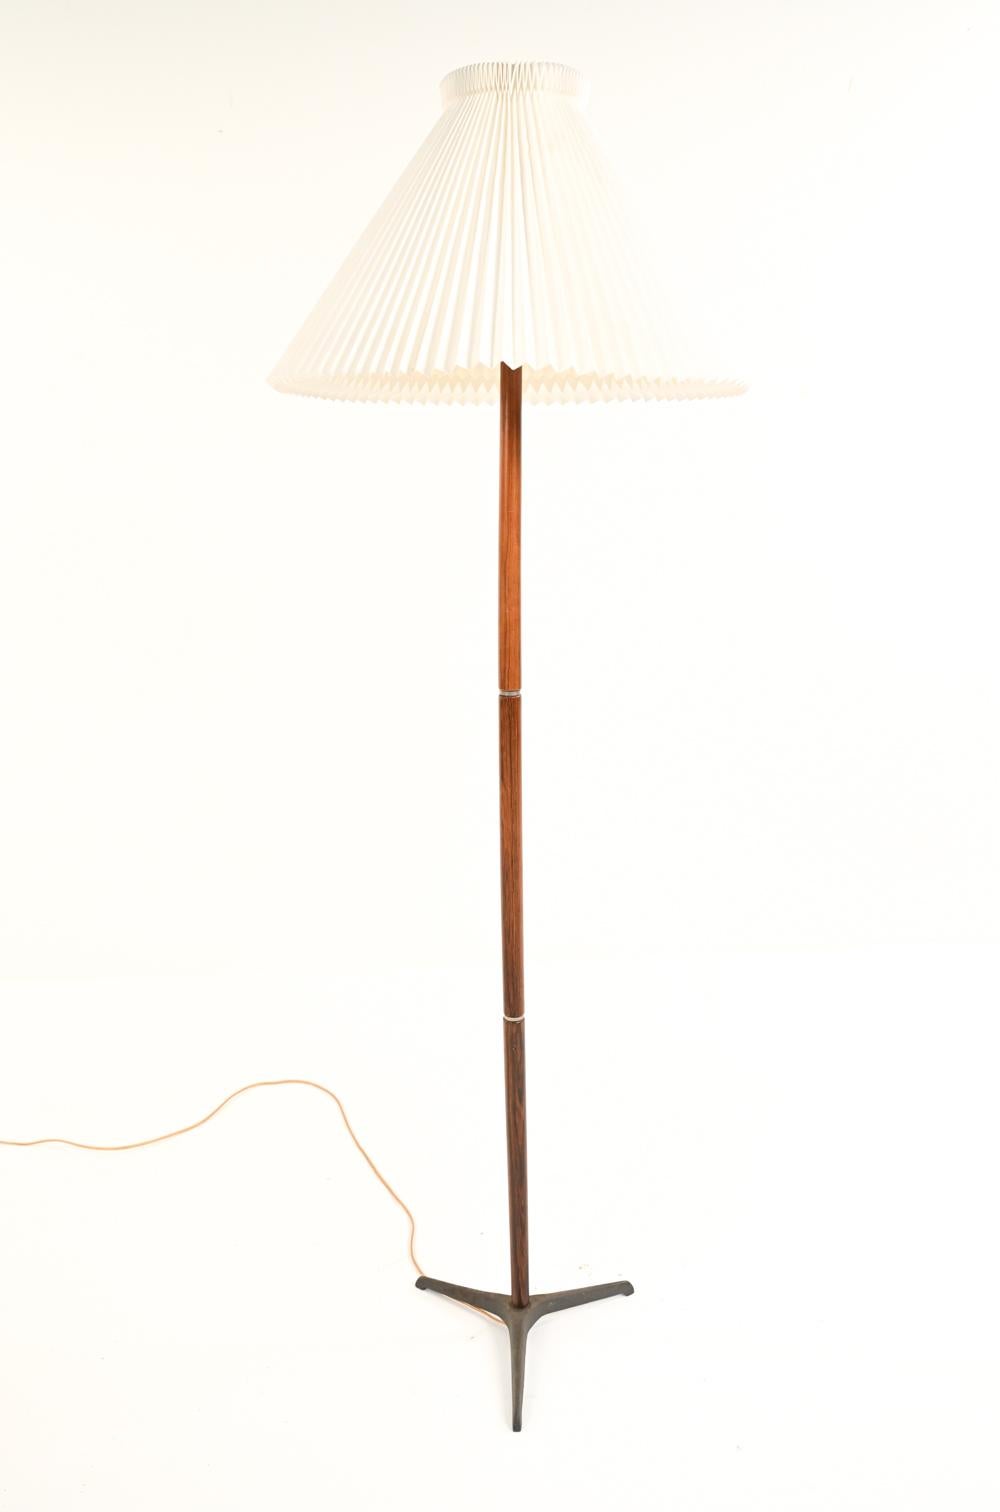 A Danish mid-century rosewood floor lamp designed by Jo Hammerborg with accordion style paper shade and cast iron tripod base. Featuring rosewood body with steel rings.